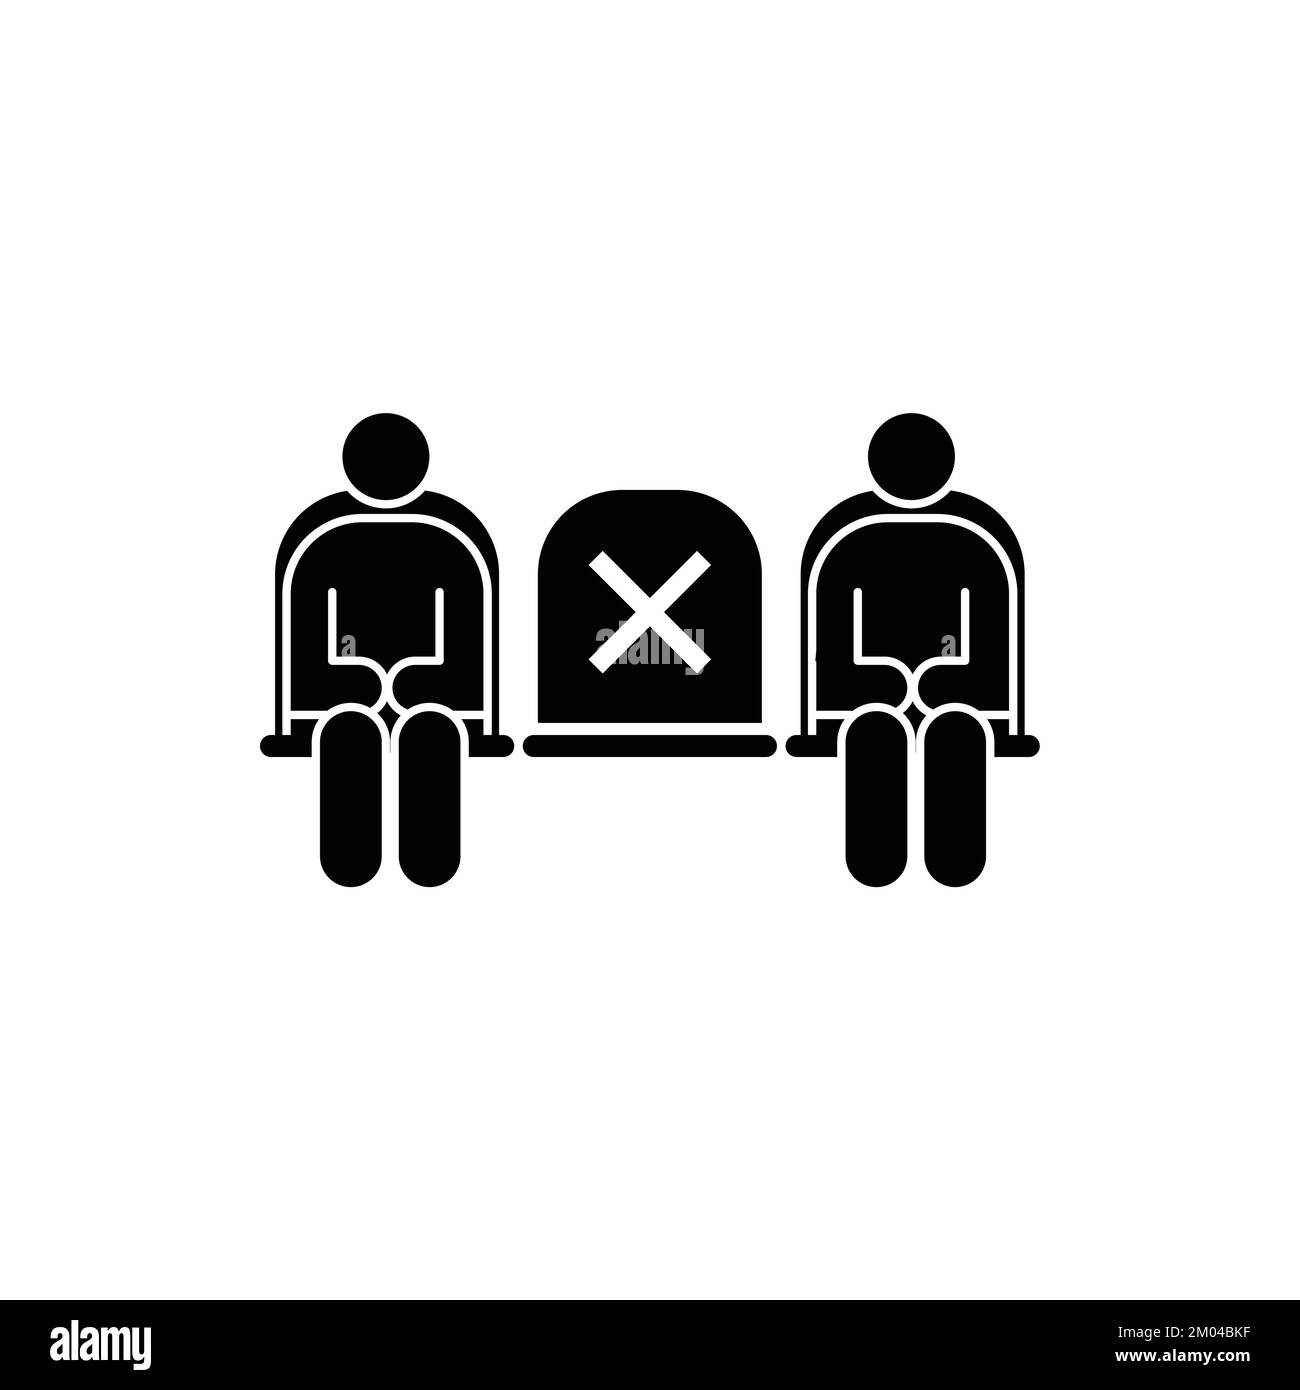 Maintain social distance do not sit sign icon. Don't use seat symbol pictogram. Stock Vector